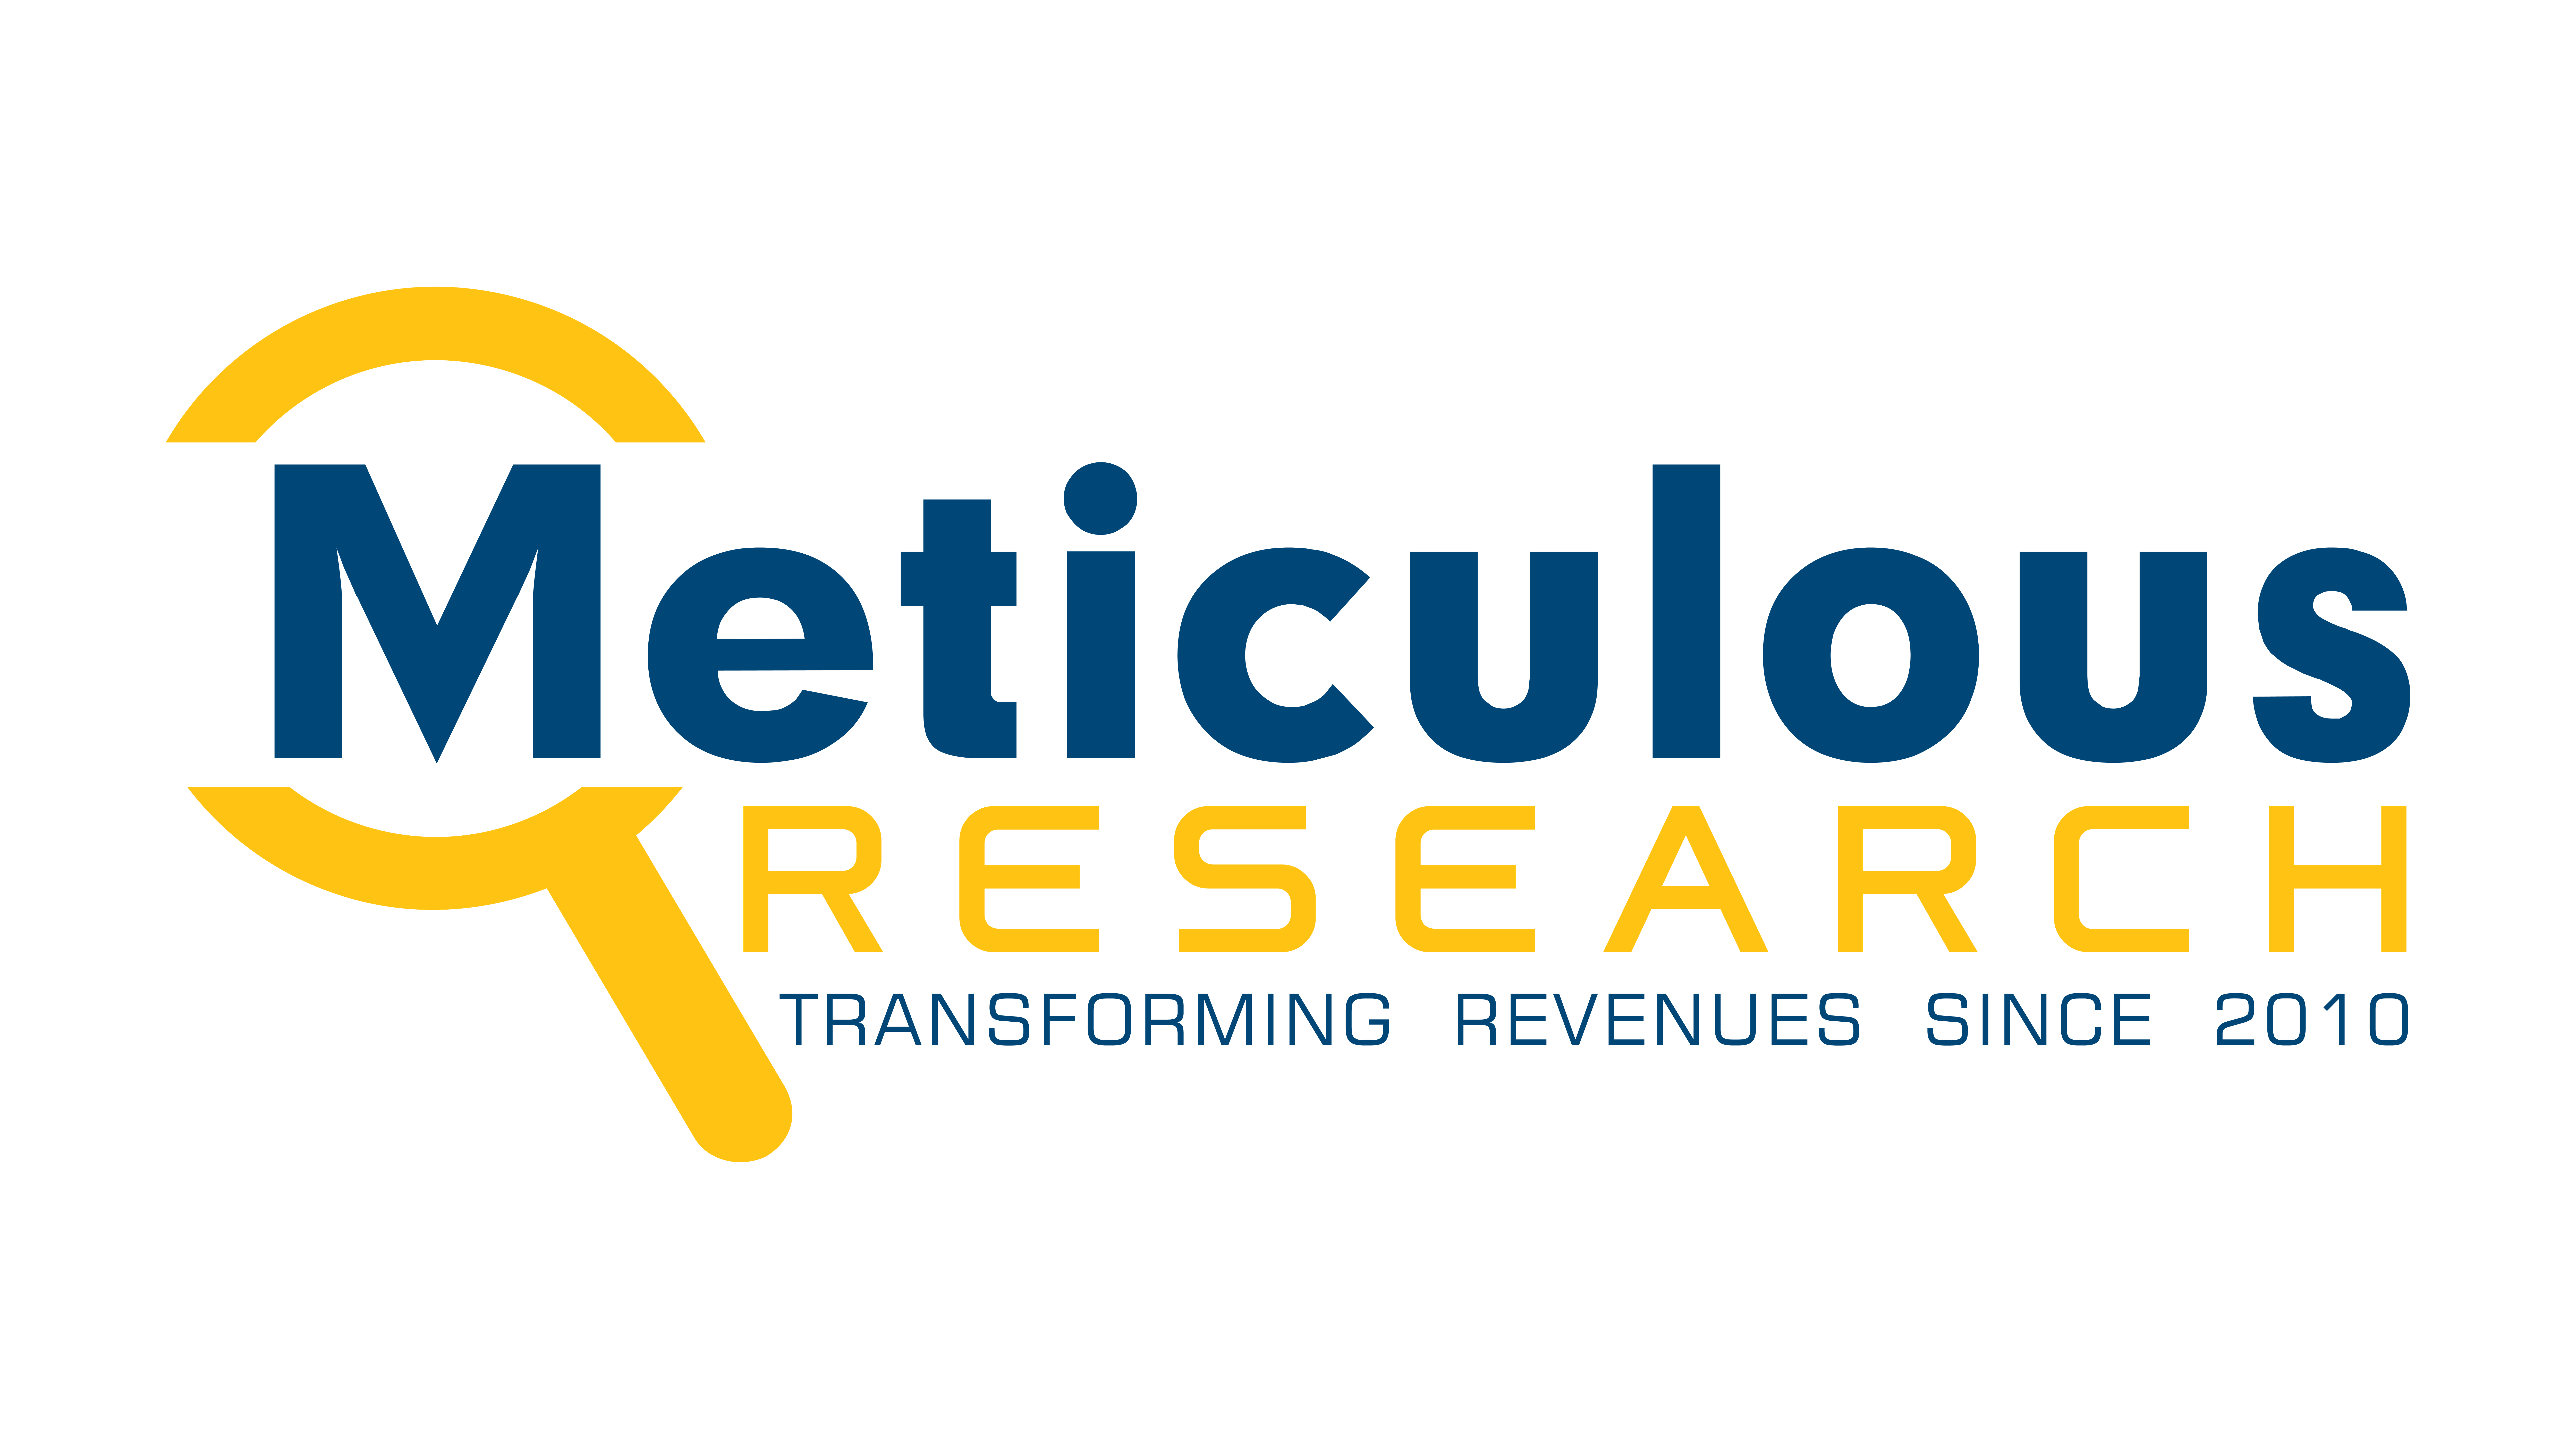 Meticulous Research Logo - Large